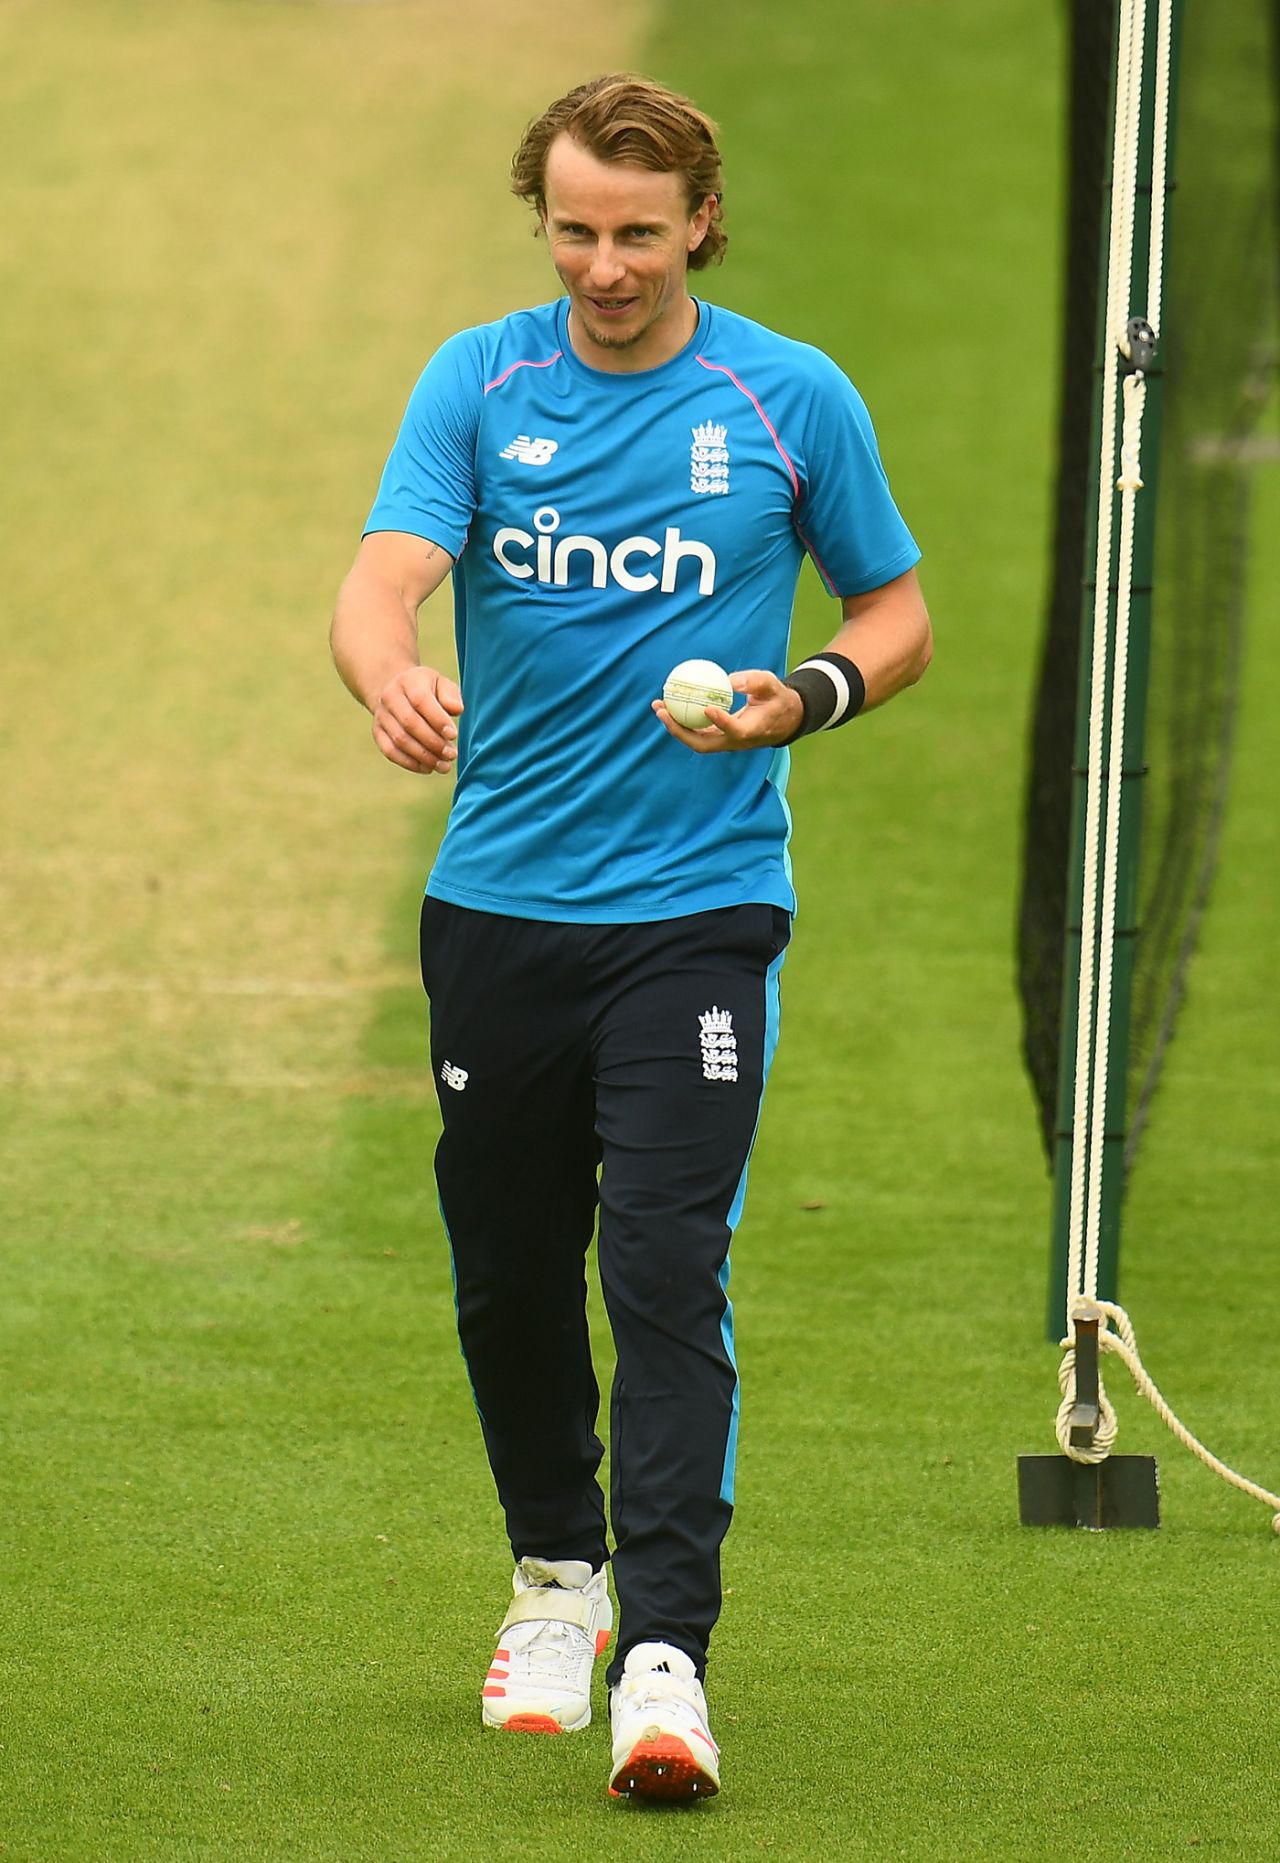 Tom Curran prepares for England's T20I series with Sri Lanka, Cardiff, June 21, 2021